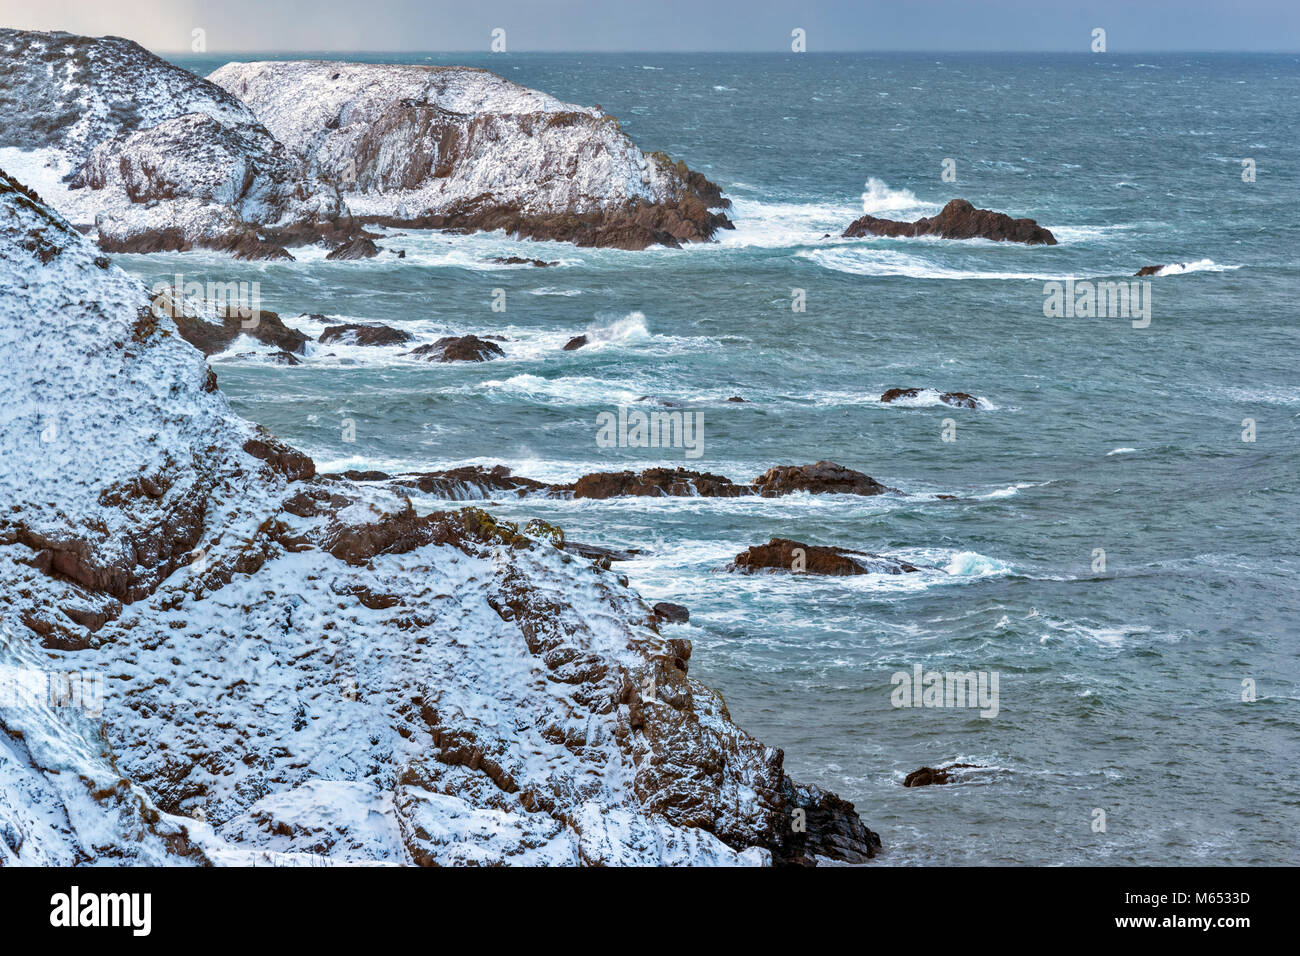 MORAY COAST SCOTLAND NEAR PORTKNOCKIE IN FEBRUARY WINTER STORM WITH HIGH WINDS AND SNOW COVERED CLIFFS Stock Photo